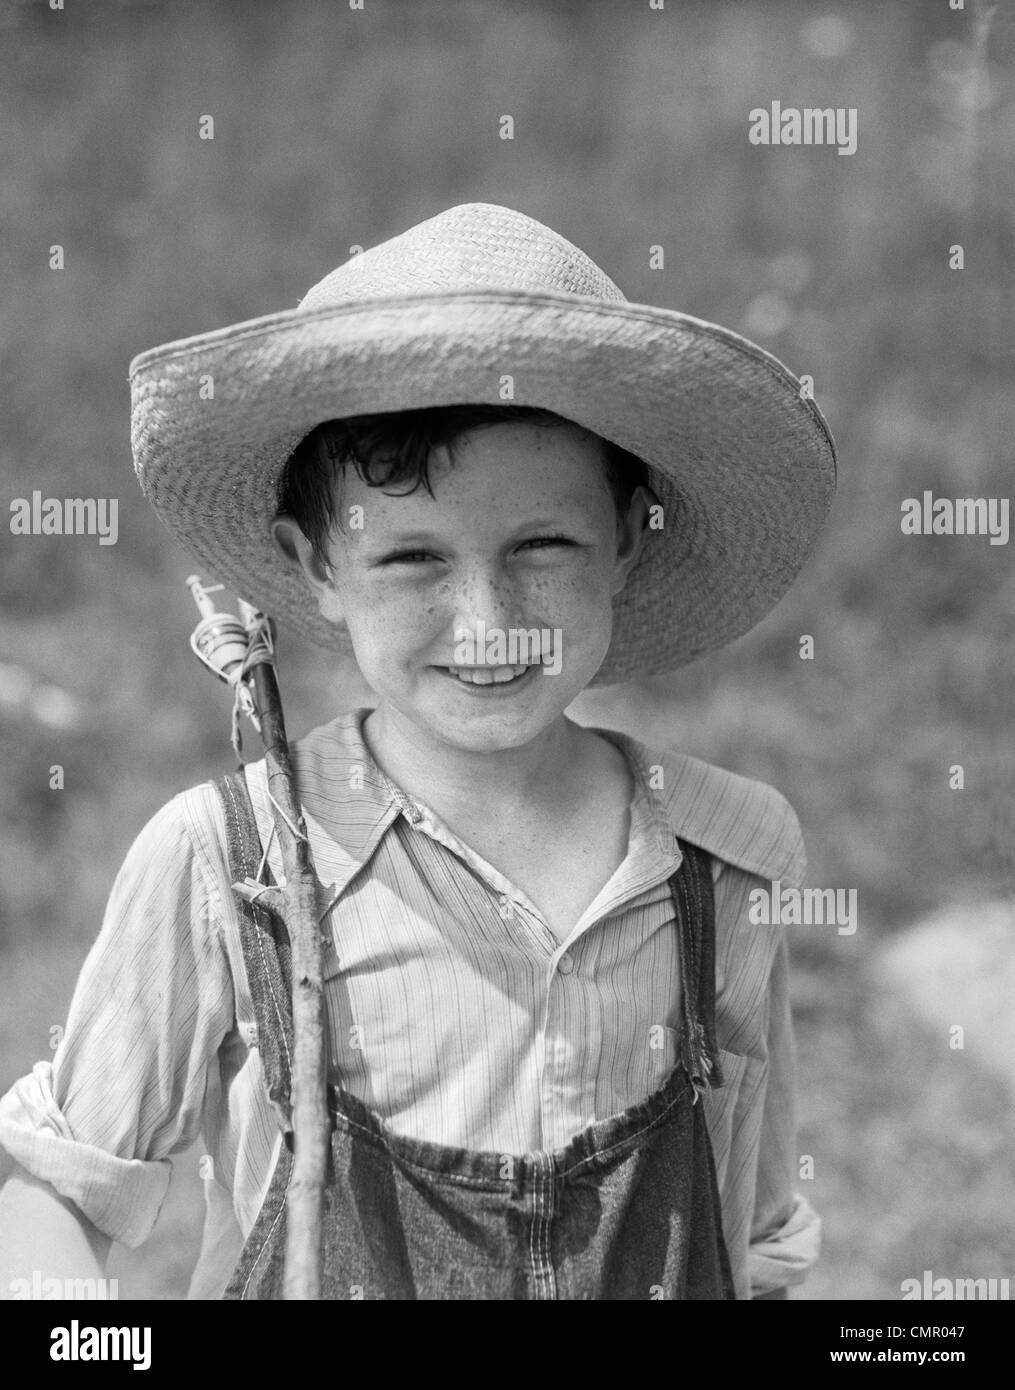 1930s SMILING BOY IN OVERALLS & STRAW HAT WITH FISHING POLE SLUNG OVER  SHOULDER Stock Photo - Alamy